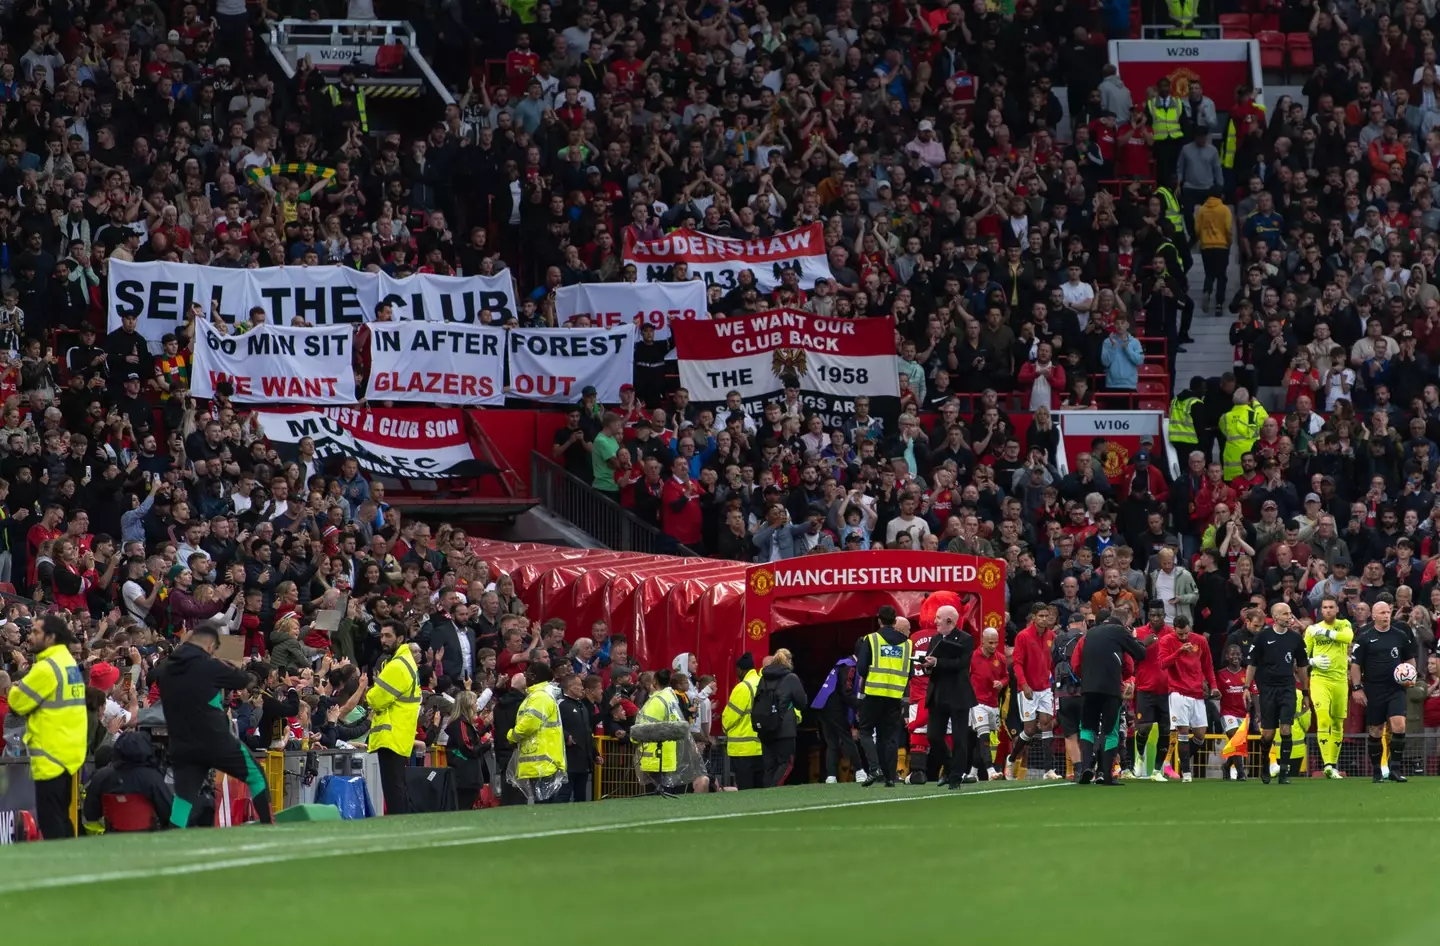 Manchester United fans protest against The Glazers. Image: Getty